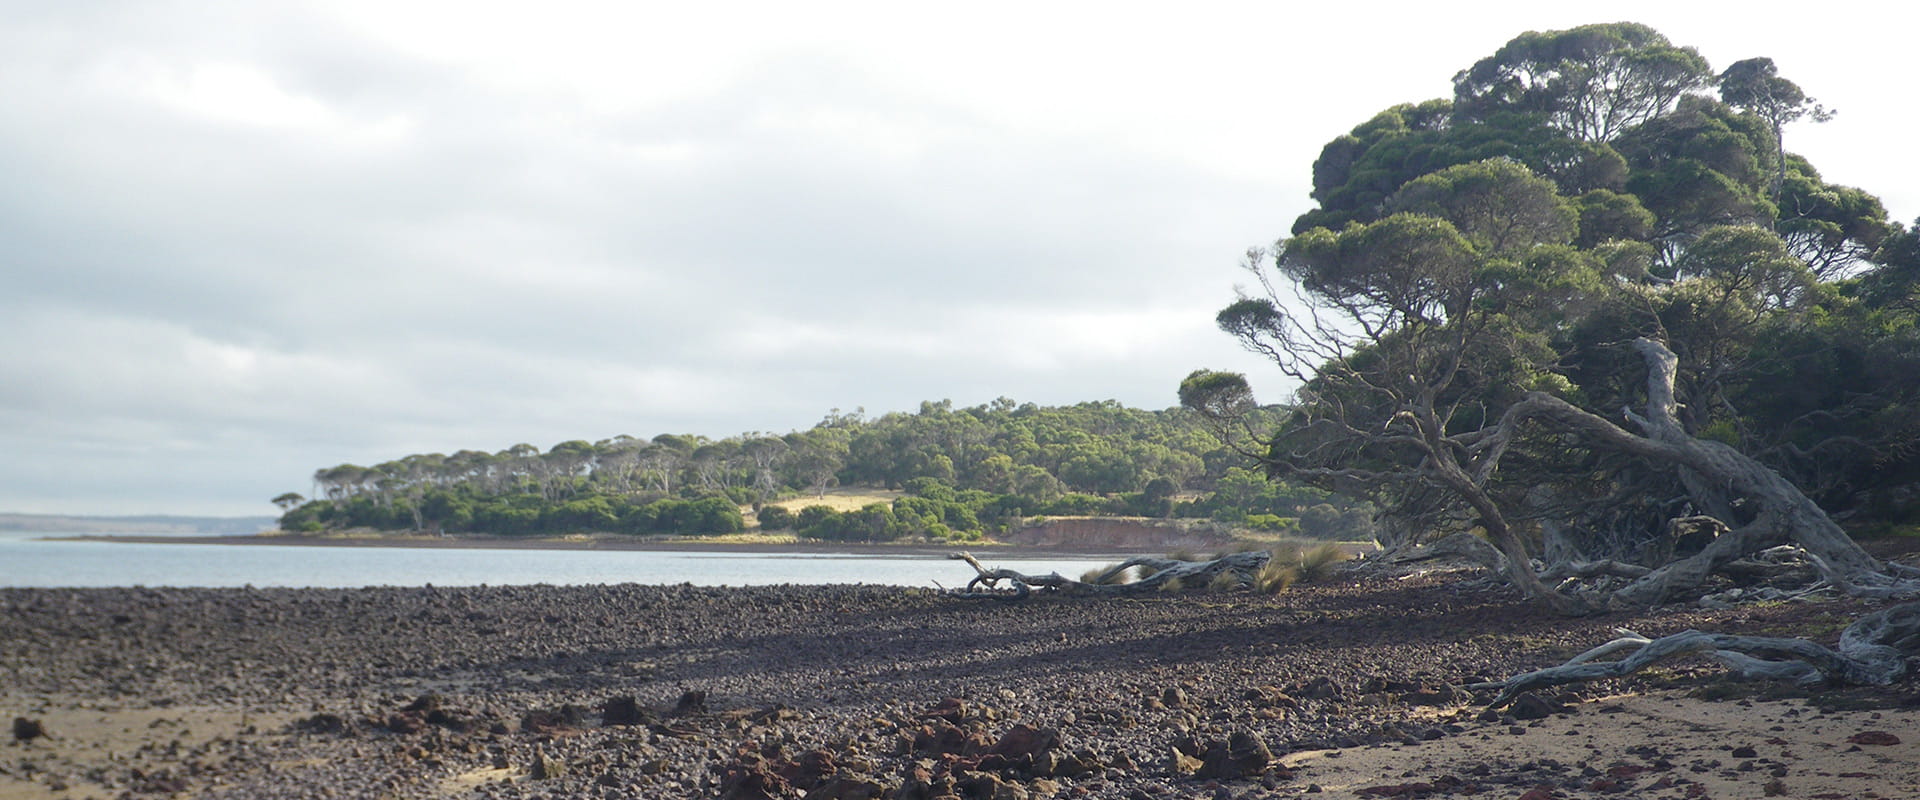 View of a rocky beach, with water and trees in the background.